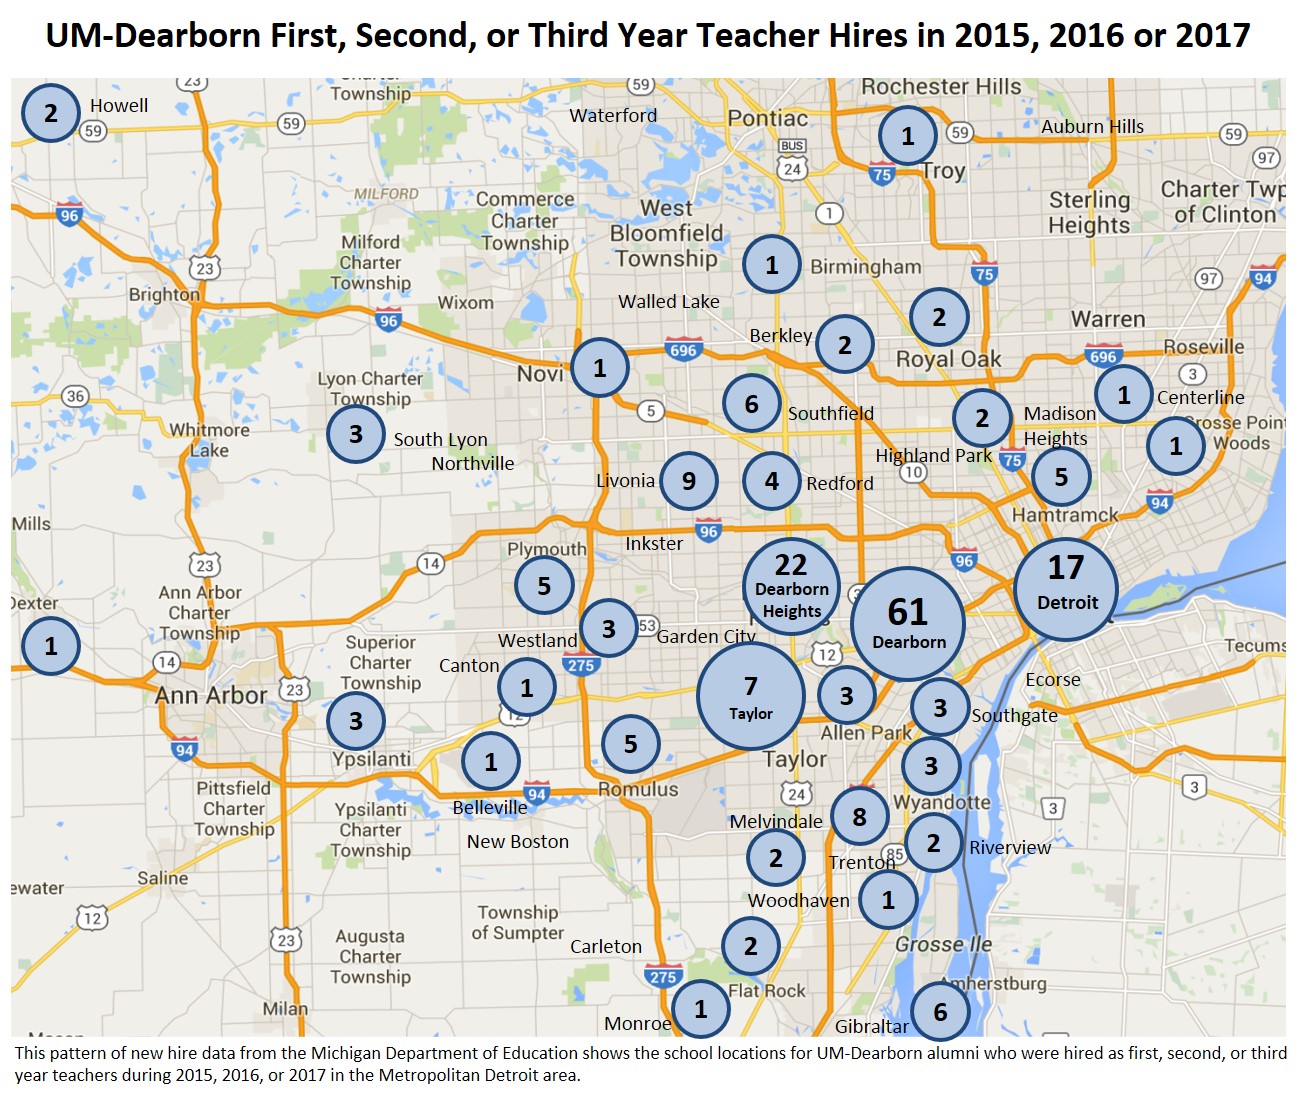 Map of southeast Michigan annotated with numbers of recent graduates hired in communities in the region.